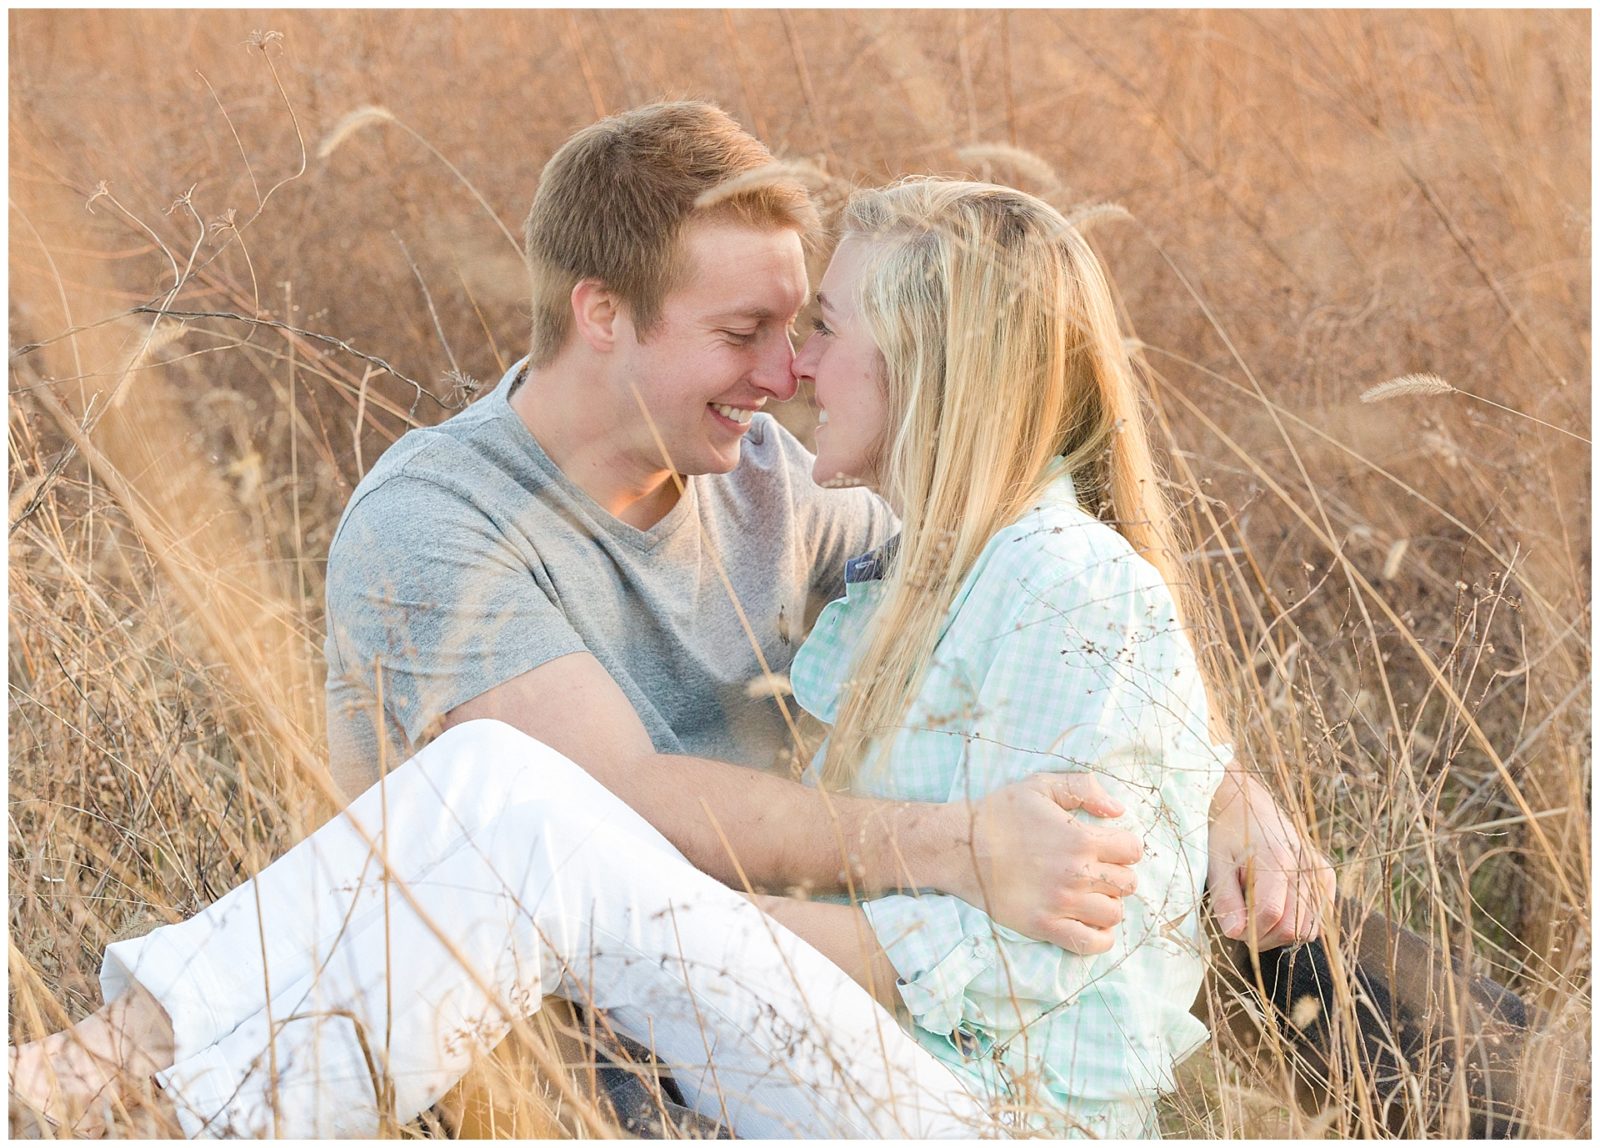 Couple in tall grass during an engagement session at Shaker Village in Harrodsburg, KY.